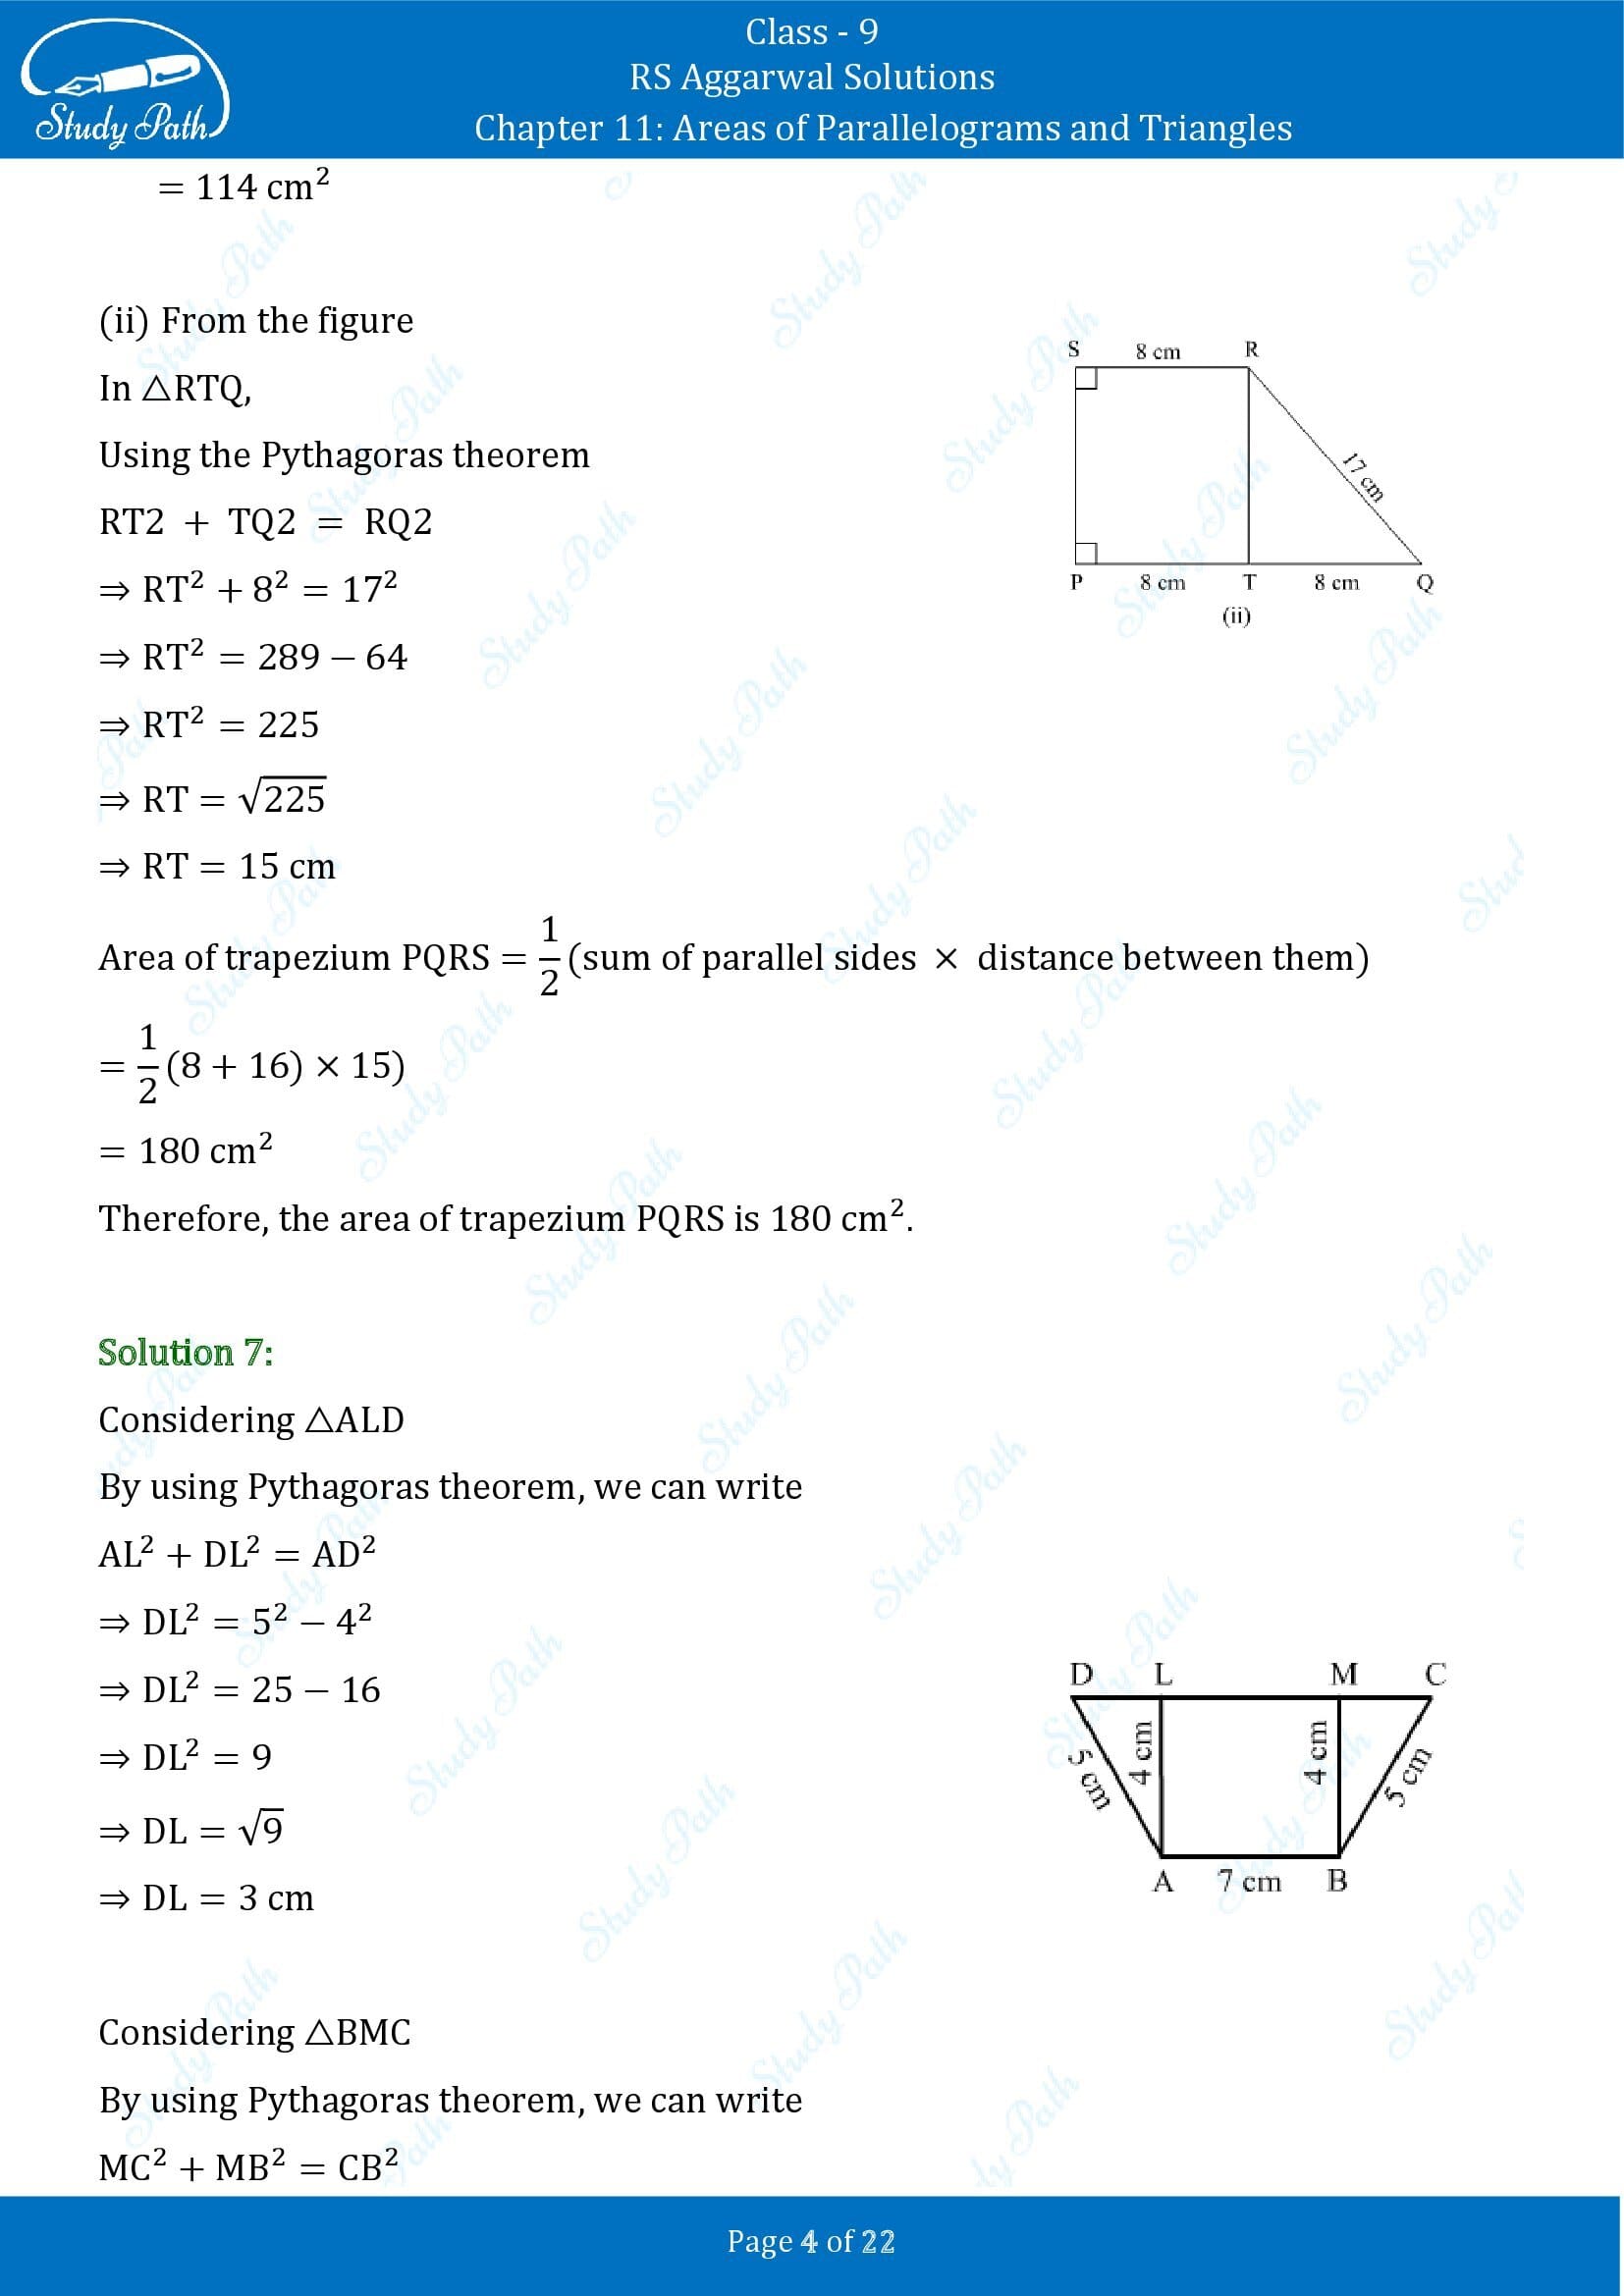 RS Aggarwal Solutions Class 9 Chapter 11 Areas of Parallelograms and Triangles Exercise 11 00004